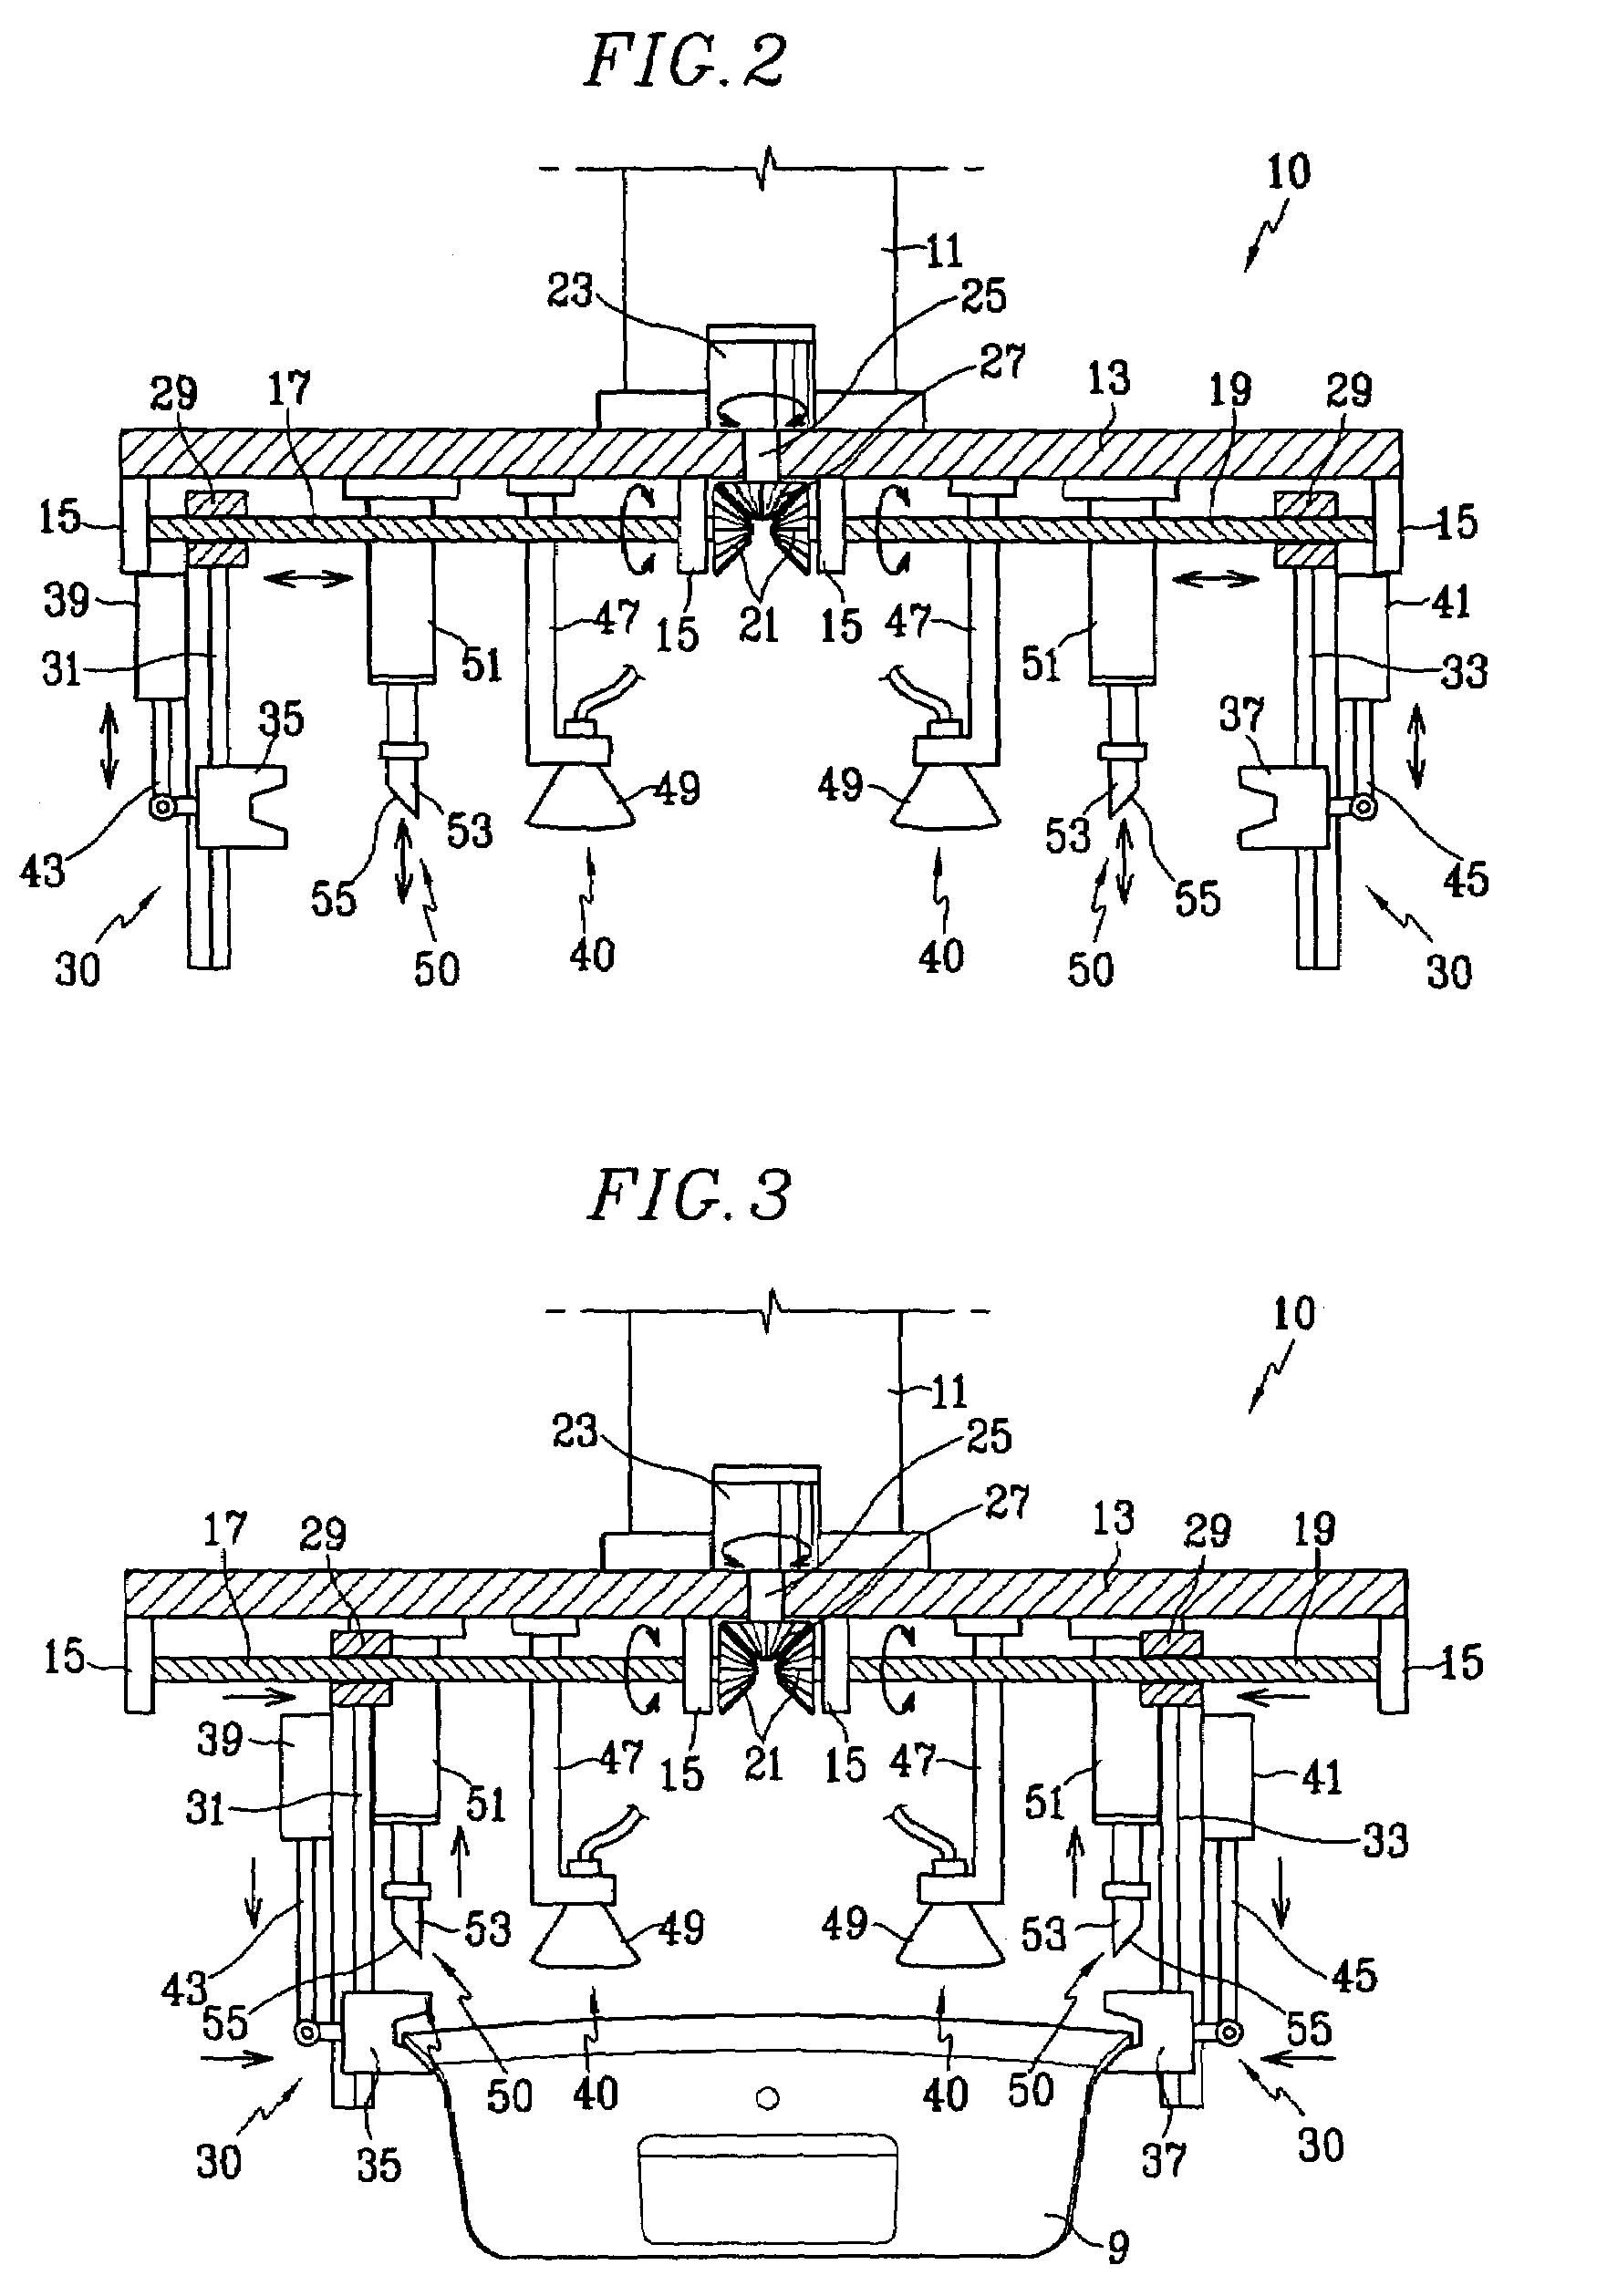 Apparatus for manipulating a vehicle body panel